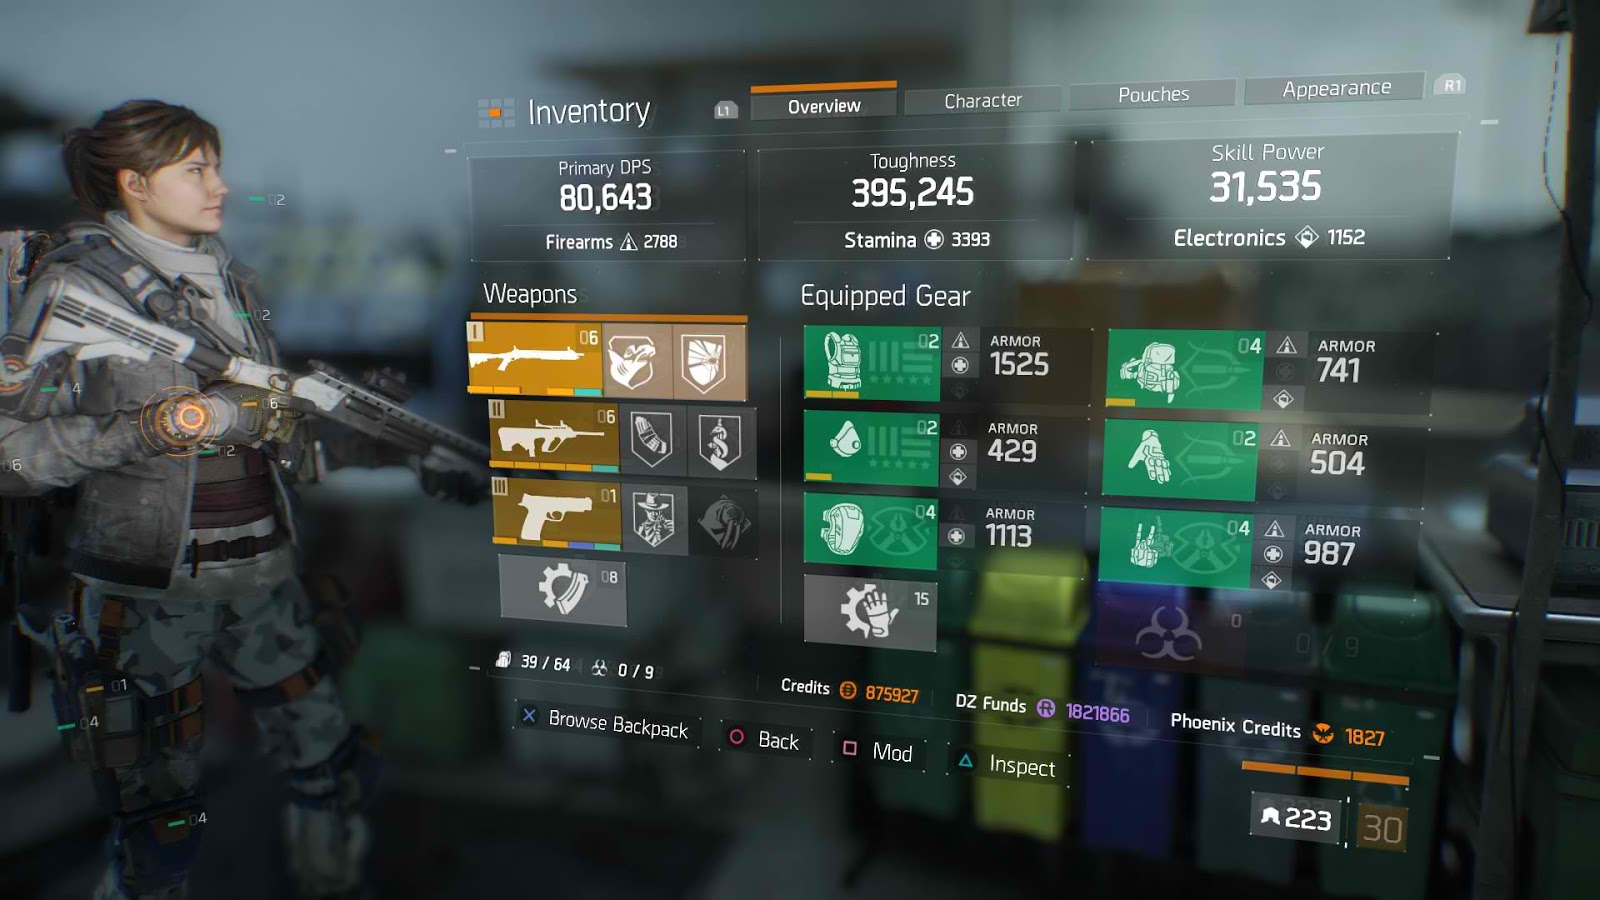 The Division Balanced Build For Pvp 395k Toughness 30k Sp 60 Edr And Pve Solo Dz06 Team Support 40k Sp Build Yhan Game